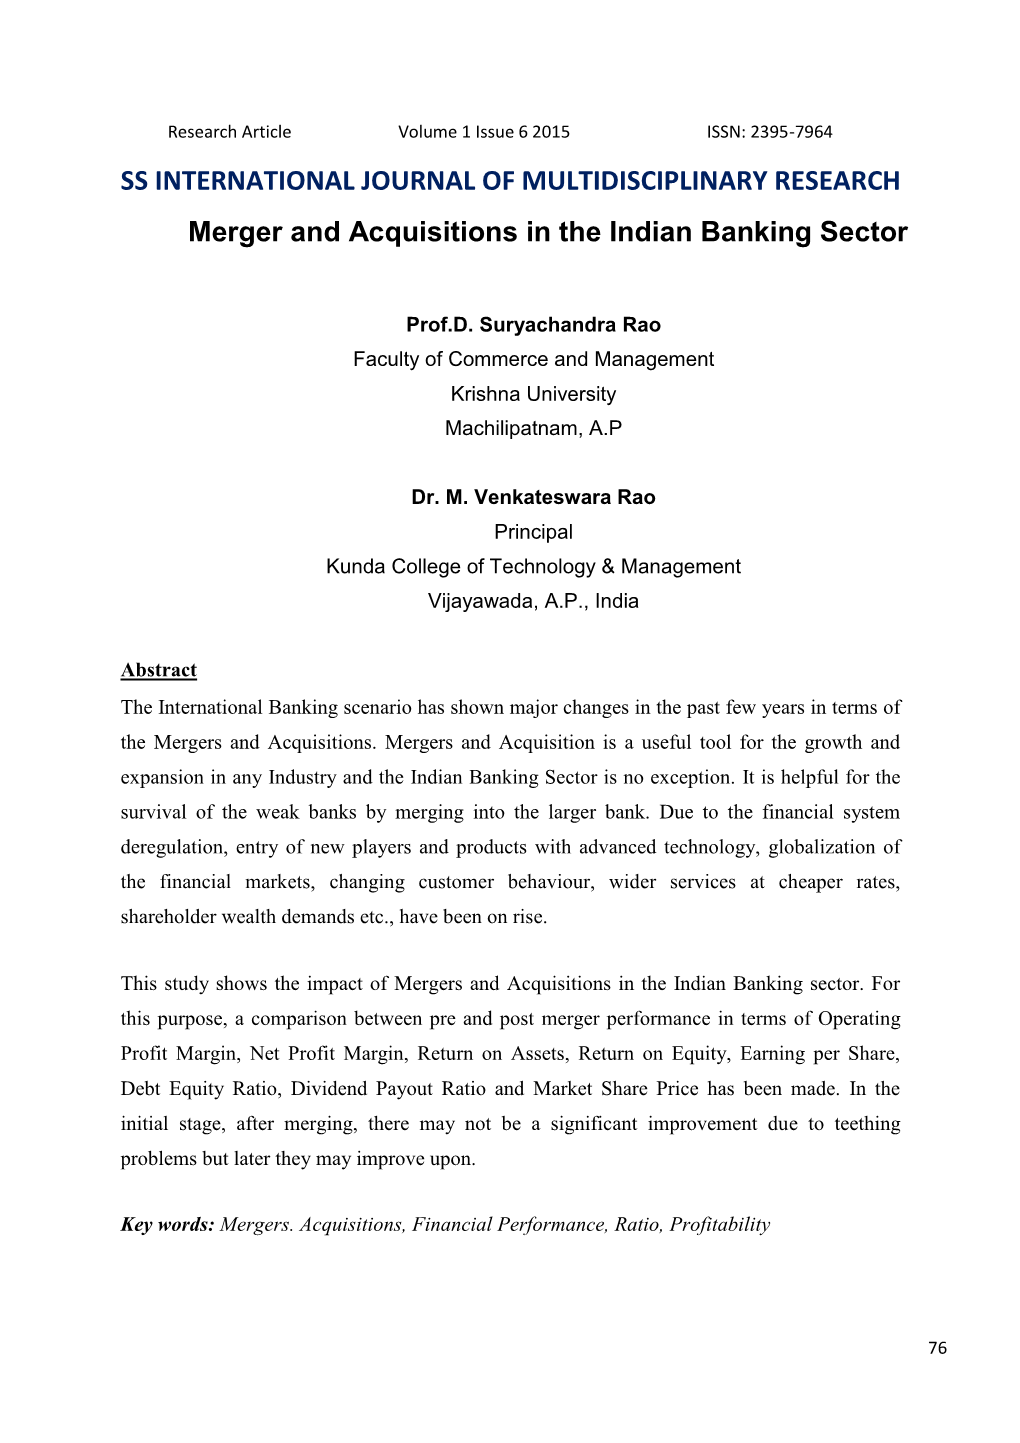 Merger and Acquisitions in the Indian Banking Sector